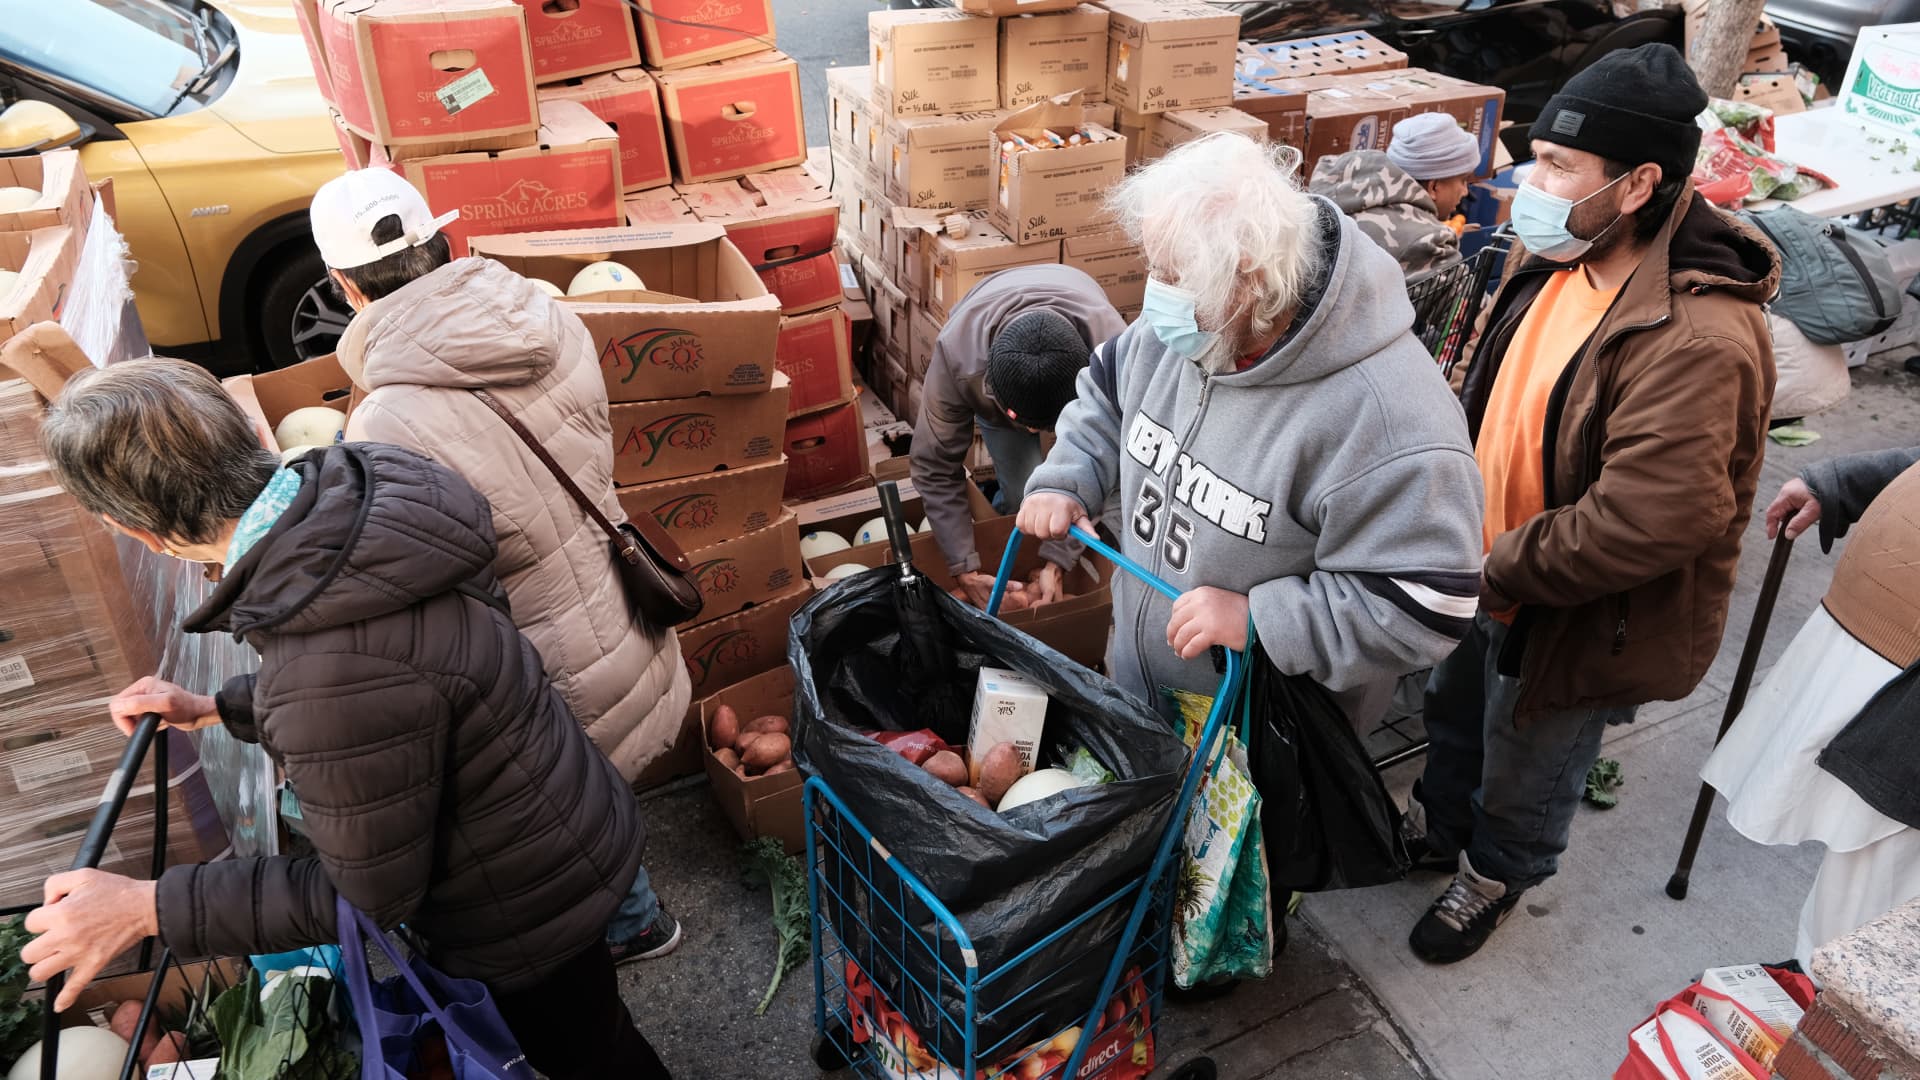 Free food is handed out by the Brooklyn community organization PASWO during a weekly food distribution on December 08, 2021 in New York City.